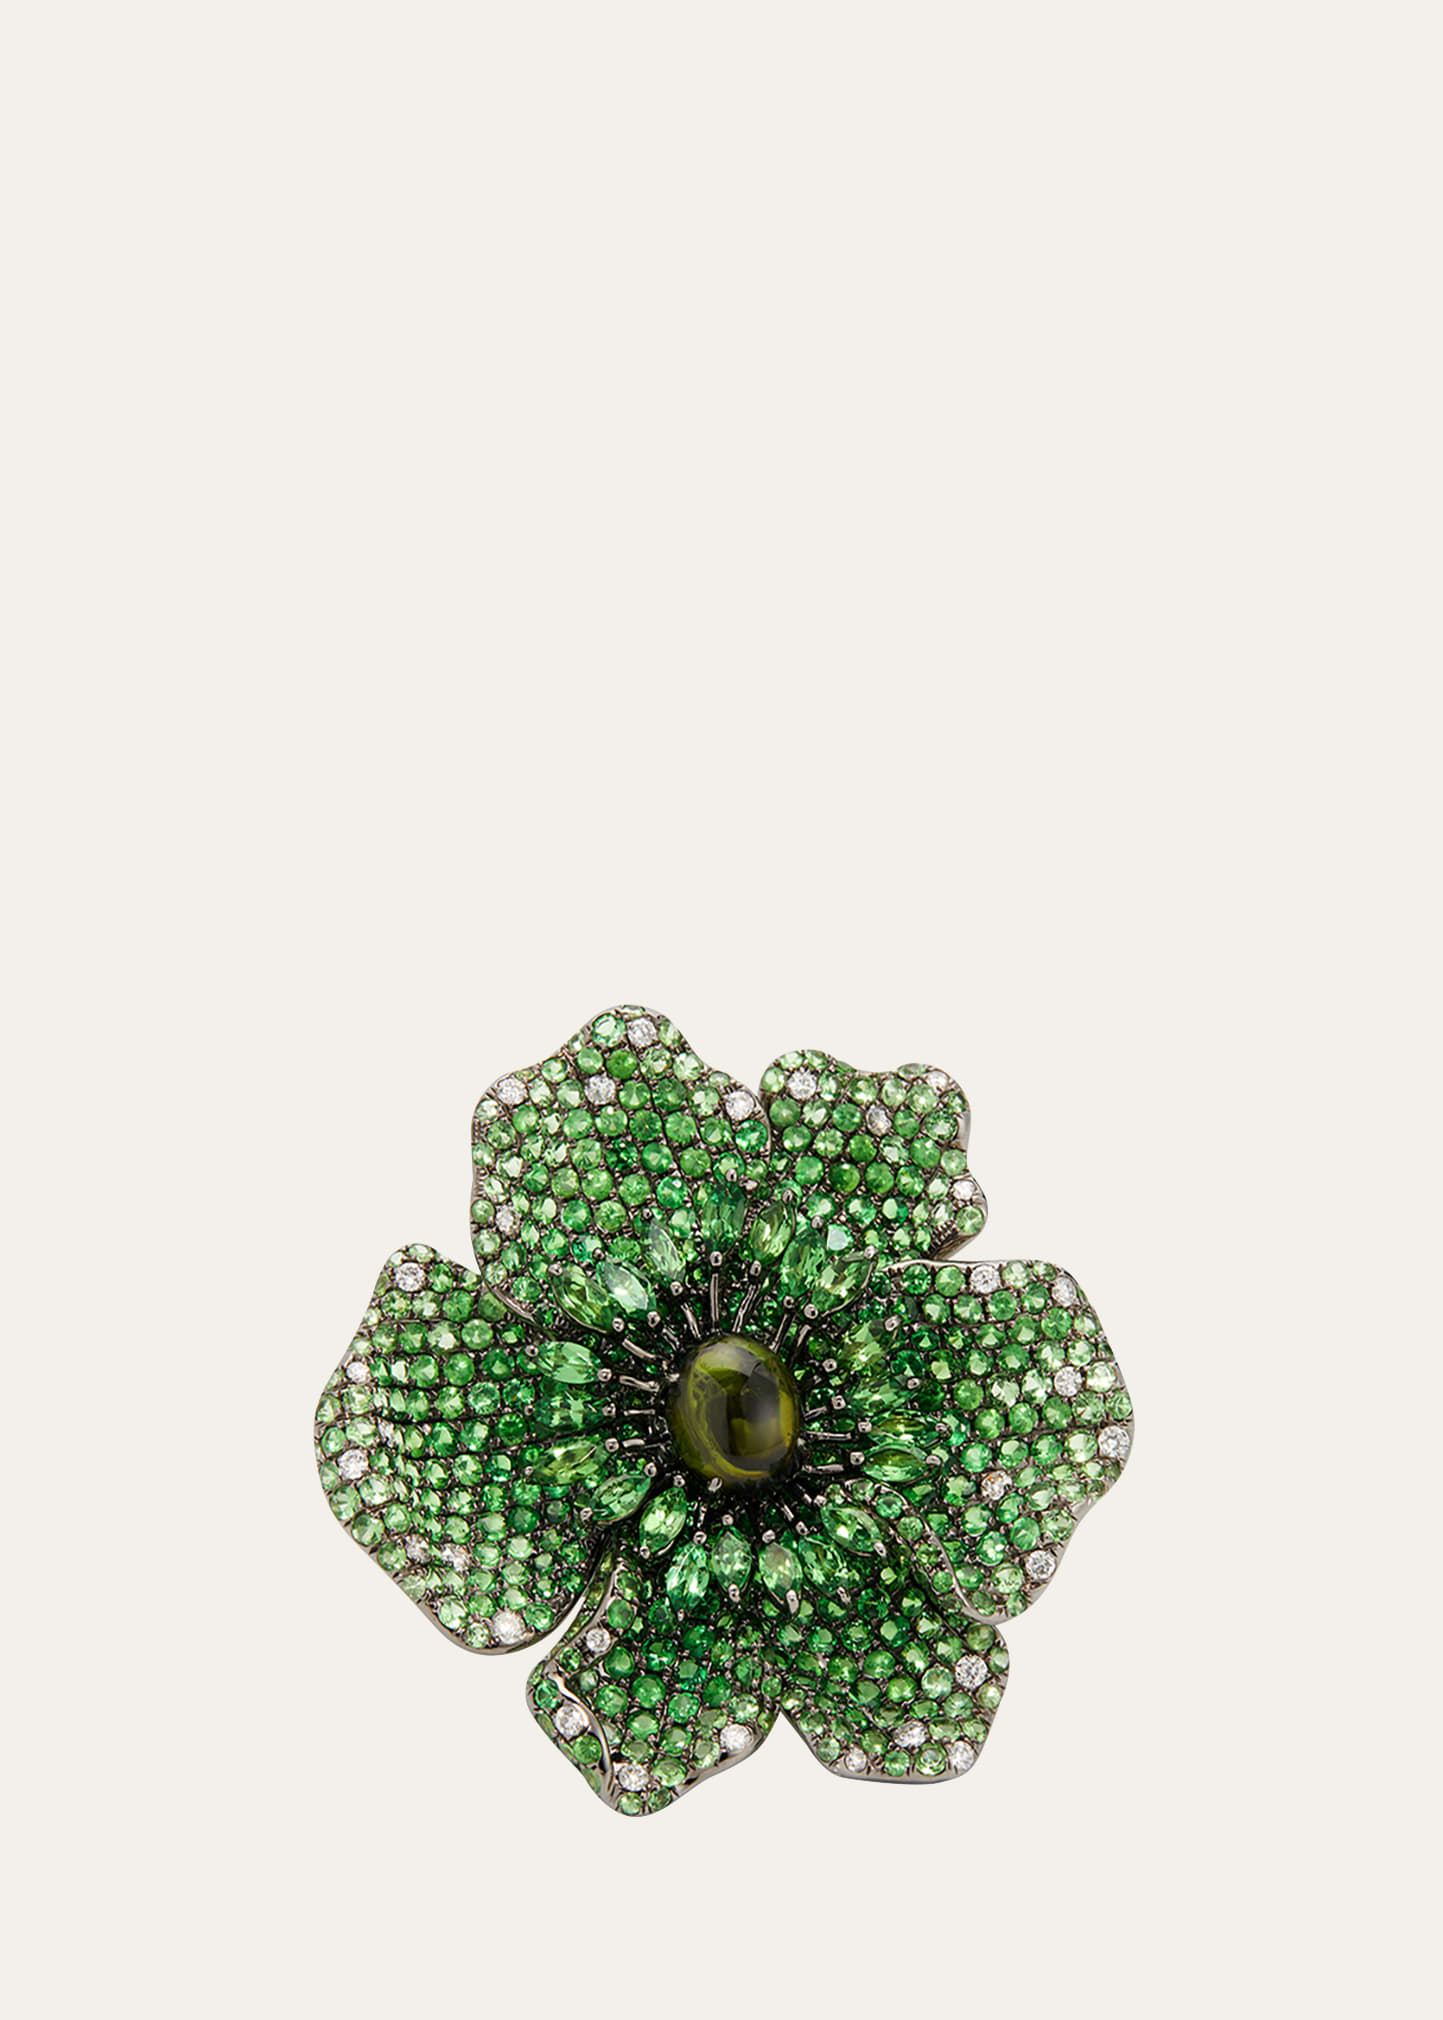 18k White Gold Green Ring from the Flower Collection, Size 7